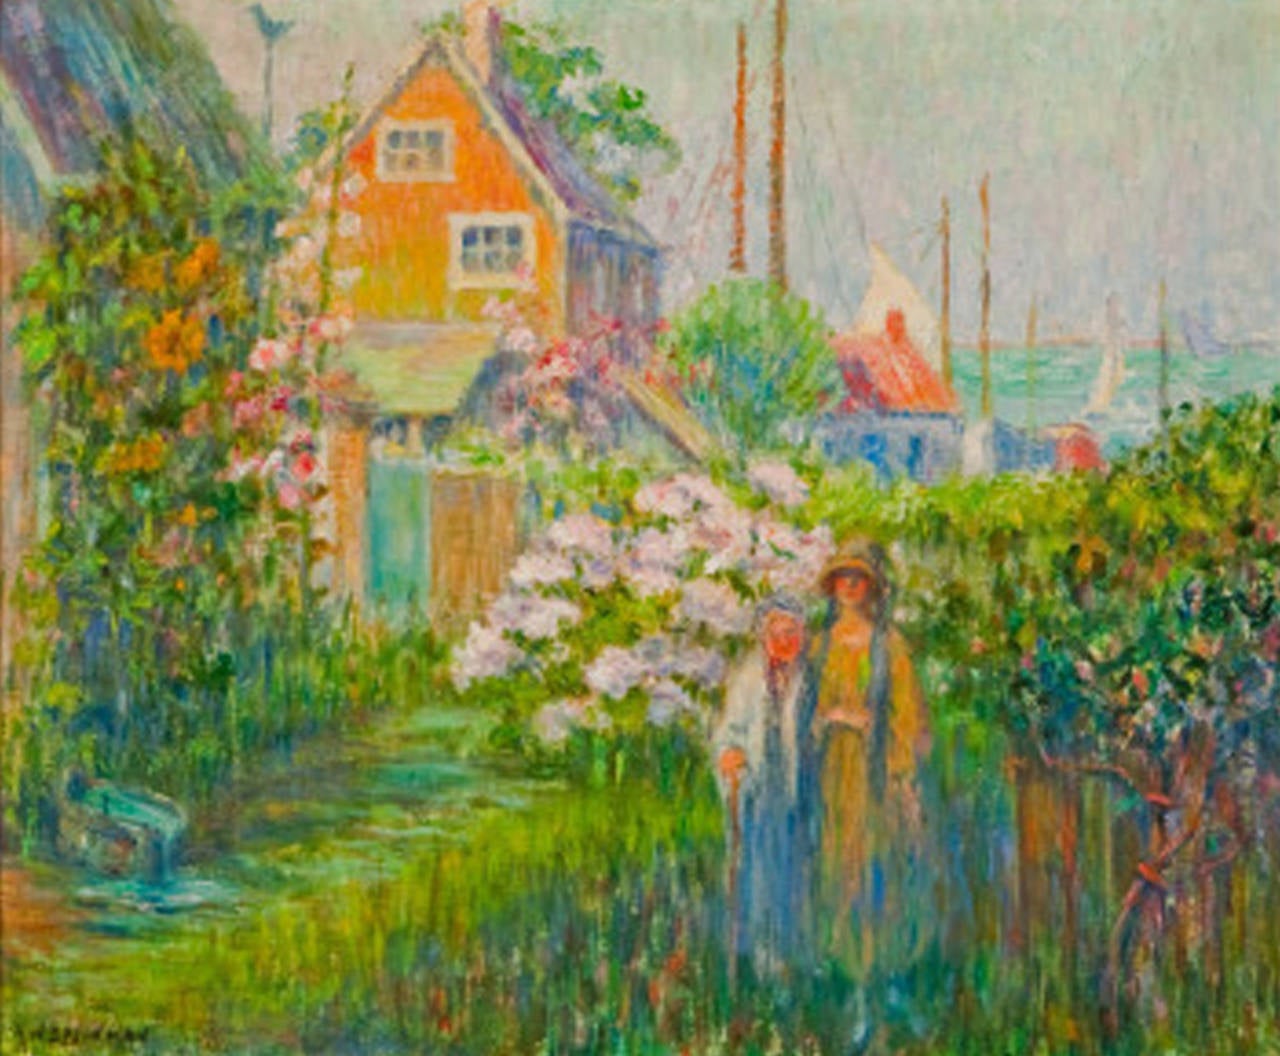 Anna W. Speakman Landscape Painting - "The End of the Village, Nantucket"